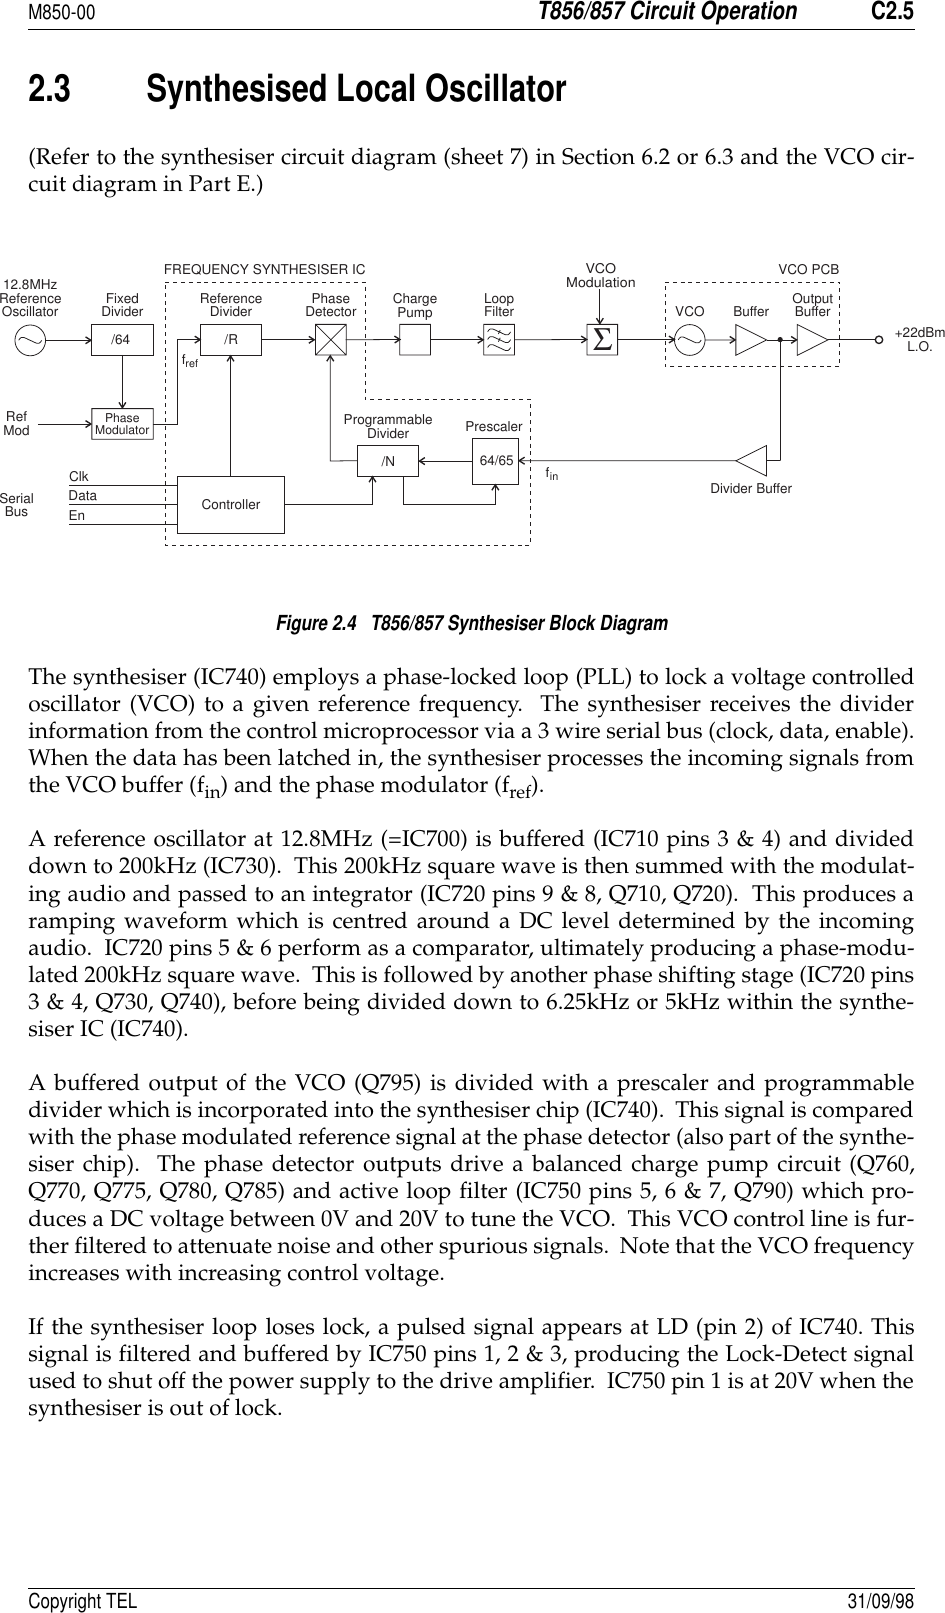 M850-00T856/857 Circuit OperationC2.5Copyright TEL 31/09/982.3 Synthesised Local Oscillator(Refer to the synthesiser circuit diagram (sheet 7) in Section 6.2 or 6.3 and the VCO cir-cuit diagram in Part E.)Figure 2.4   T856/857 Synthesiser Block DiagramThe synthesiser (IC740) employs a phase-locked loop (PLL) to lock a voltage controlledoscillator (VCO) to a given reference frequency.  The synthesiser receives the dividerinformation from the control microprocessor via a 3 wire serial bus (clock, data, enable).When the data has been latched in, the synthesiser processes the incoming signals fromthe VCO buffer (fin) and the phase modulator (fref).A reference oscillator at 12.8MHz (=IC700) is buffered (IC710 pins 3 &amp; 4) and divideddown to 200kHz (IC730).  This 200kHz square wave is then summed with the modulat-ing audio and passed to an integrator (IC720 pins 9 &amp; 8, Q710, Q720).  This produces aramping waveform which is centred around a DC level determined by the incomingaudio.  IC720 pins 5 &amp; 6 perform as a comparator, ultimately producing a phase-modu-lated 200kHz square wave.  This is followed by another phase shifting stage (IC720 pins3 &amp; 4, Q730, Q740), before being divided down to 6.25kHz or 5kHz within the synthe-siser IC (IC740).A buffered output of the VCO (Q795) is divided with a prescaler and programmabledivider which is incorporated into the synthesiser chip (IC740).  This signal is comparedwith the phase modulated reference signal at the phase detector (also part of the synthe-siser chip).  The phase detector outputs drive a balanced charge pump circuit (Q760,Q770, Q775, Q780, Q785) and active loop filter (IC750 pins 5, 6 &amp; 7, Q790) which pro-duces a DC voltage between 0V and 20V to tune the VCO.  This VCO control line is fur-ther filtered to attenuate noise and other spurious signals.  Note that the VCO frequencyincreases with increasing control voltage.If the synthesiser loop loses lock, a pulsed signal appears at LD (pin 2) of IC740. Thissignal is filtered and buffered by IC750 pins 1, 2 &amp; 3, producing the Lock-Detect signalused to shut off the power supply to the drive amplifier.  IC750 pin 1 is at 20V when thesynthesiser is out of lock./RReferenceDivider12.8MHzReferenceOscillator FixedDivider/64PhaseModulatorRefModPhaseDetector ChargePump LoopFilterFREQUENCY SYNTHESISER ICSerialBusClkDataEn Controller/NProgrammableDivider64/65PrescalerVCO PCBVCO ModulationVCO Buffer OutputBuffer+22dBmL.O.Divider BufferfreffinΣ